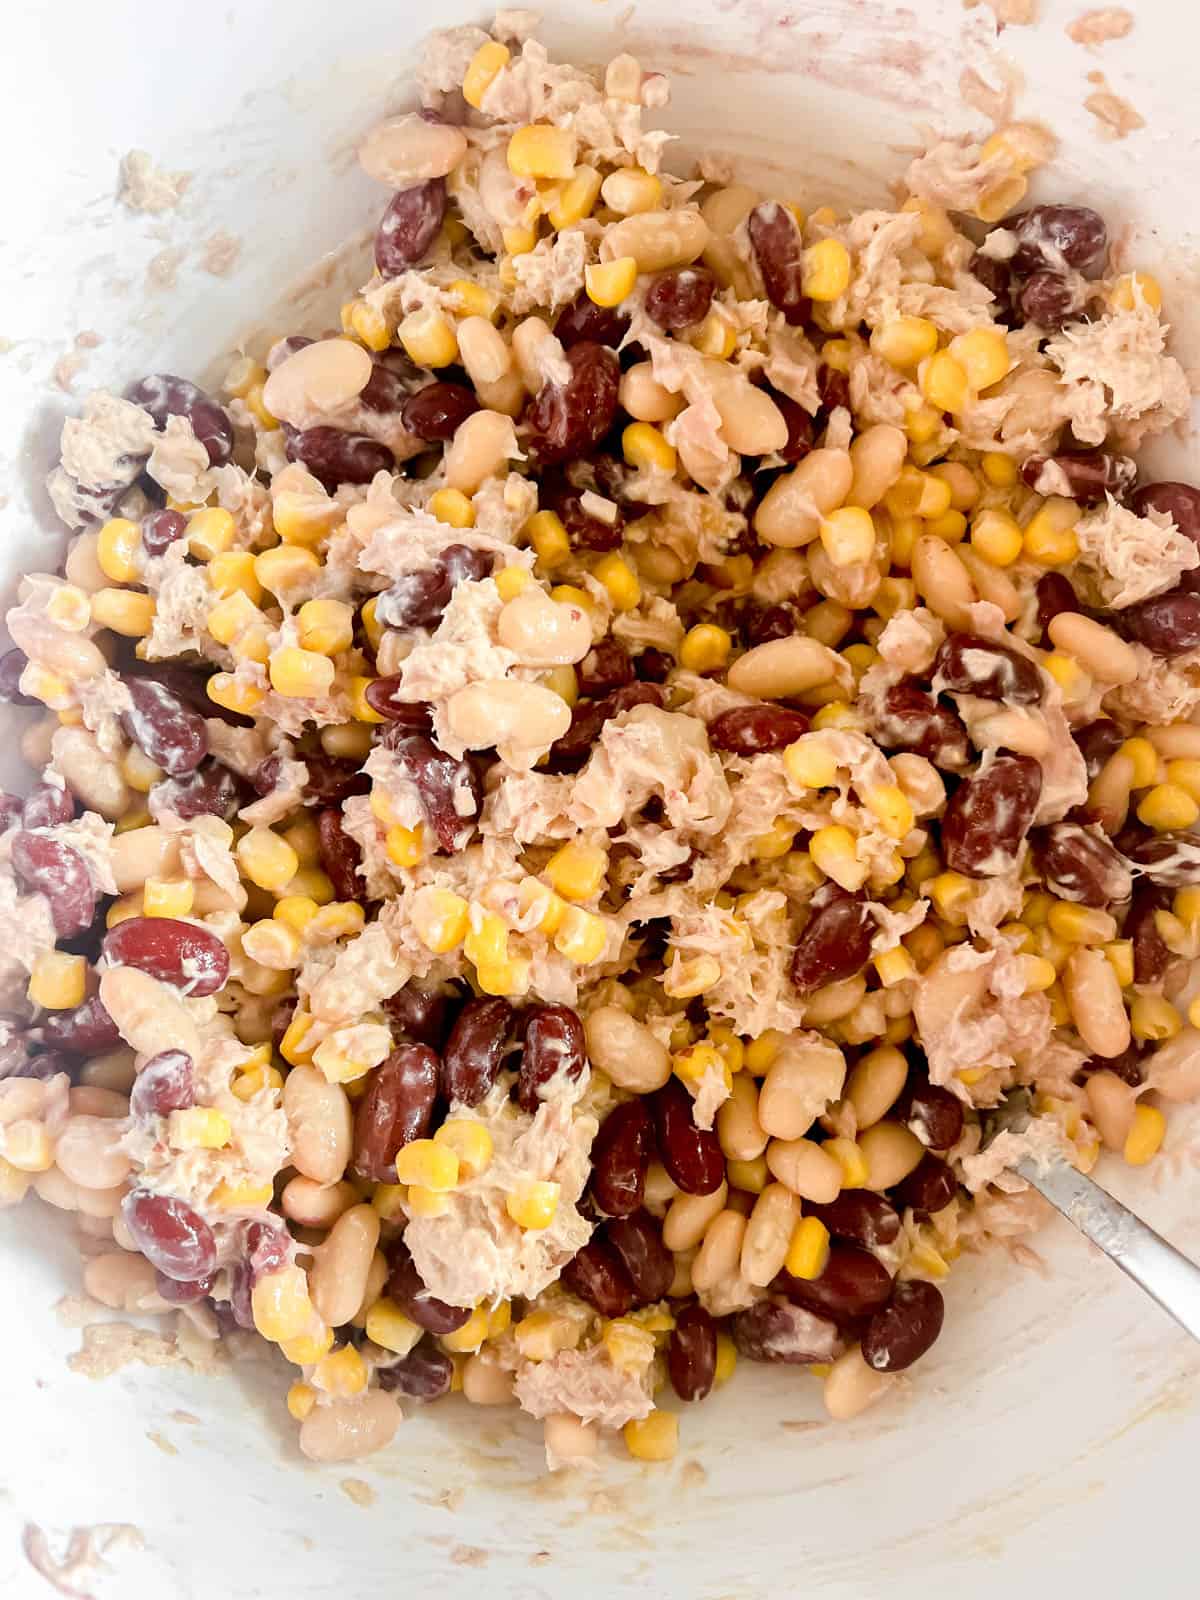 Tuna, beans and corn mixed together.